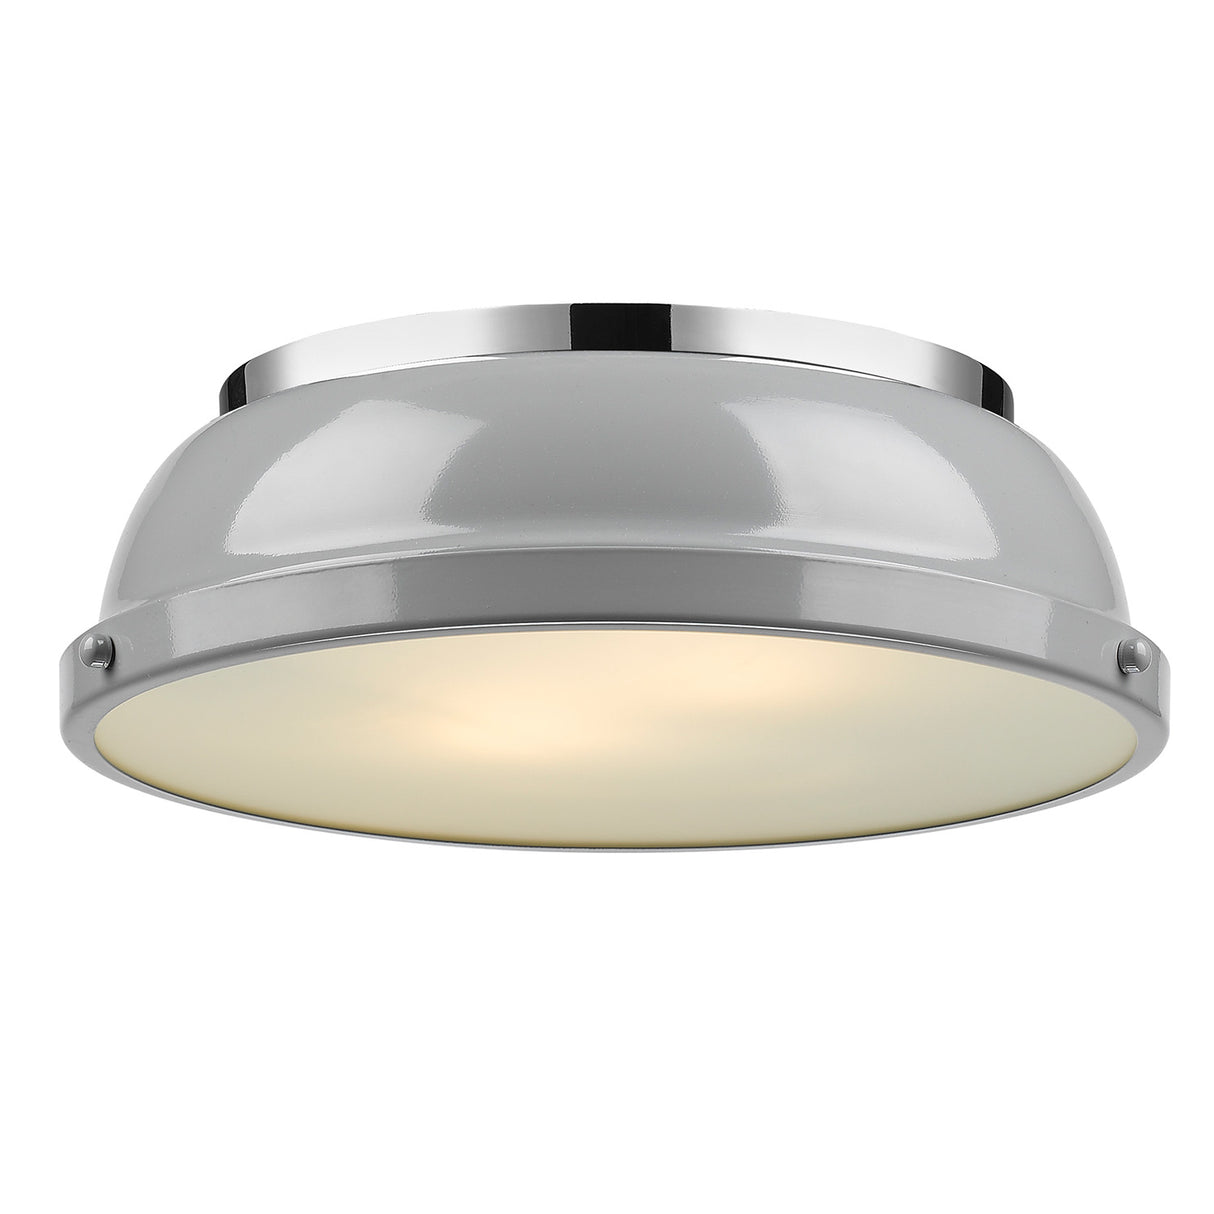 Duncan 14" Flush Mount in Chrome with a Gray Shade